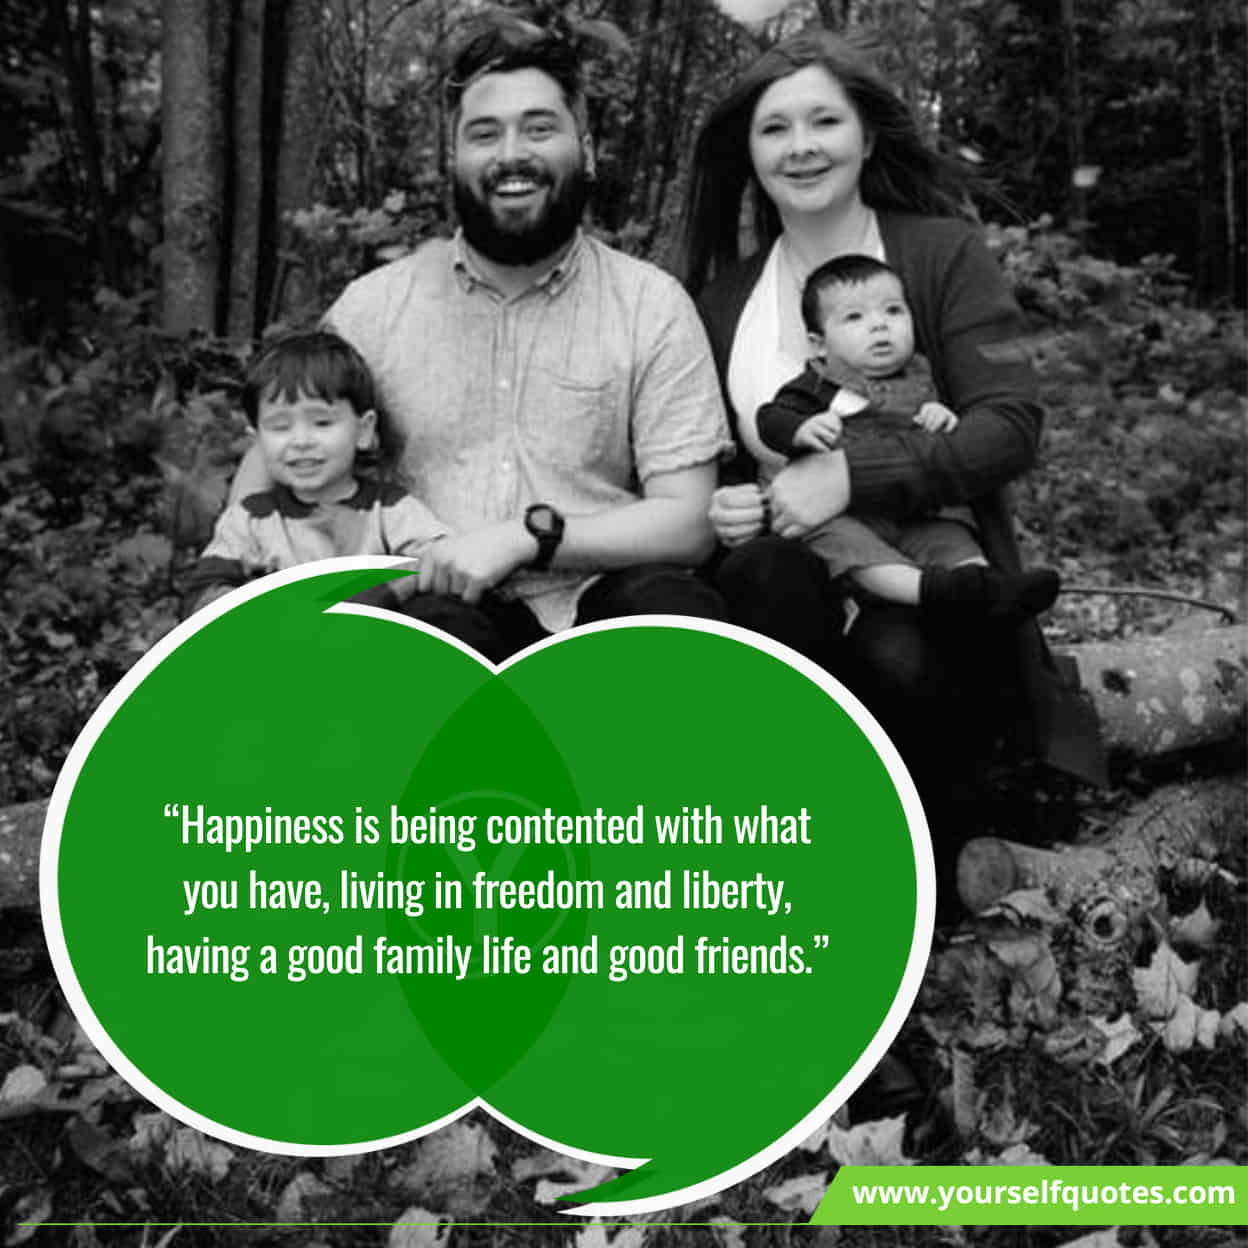 Best Family Quotes About Happiness